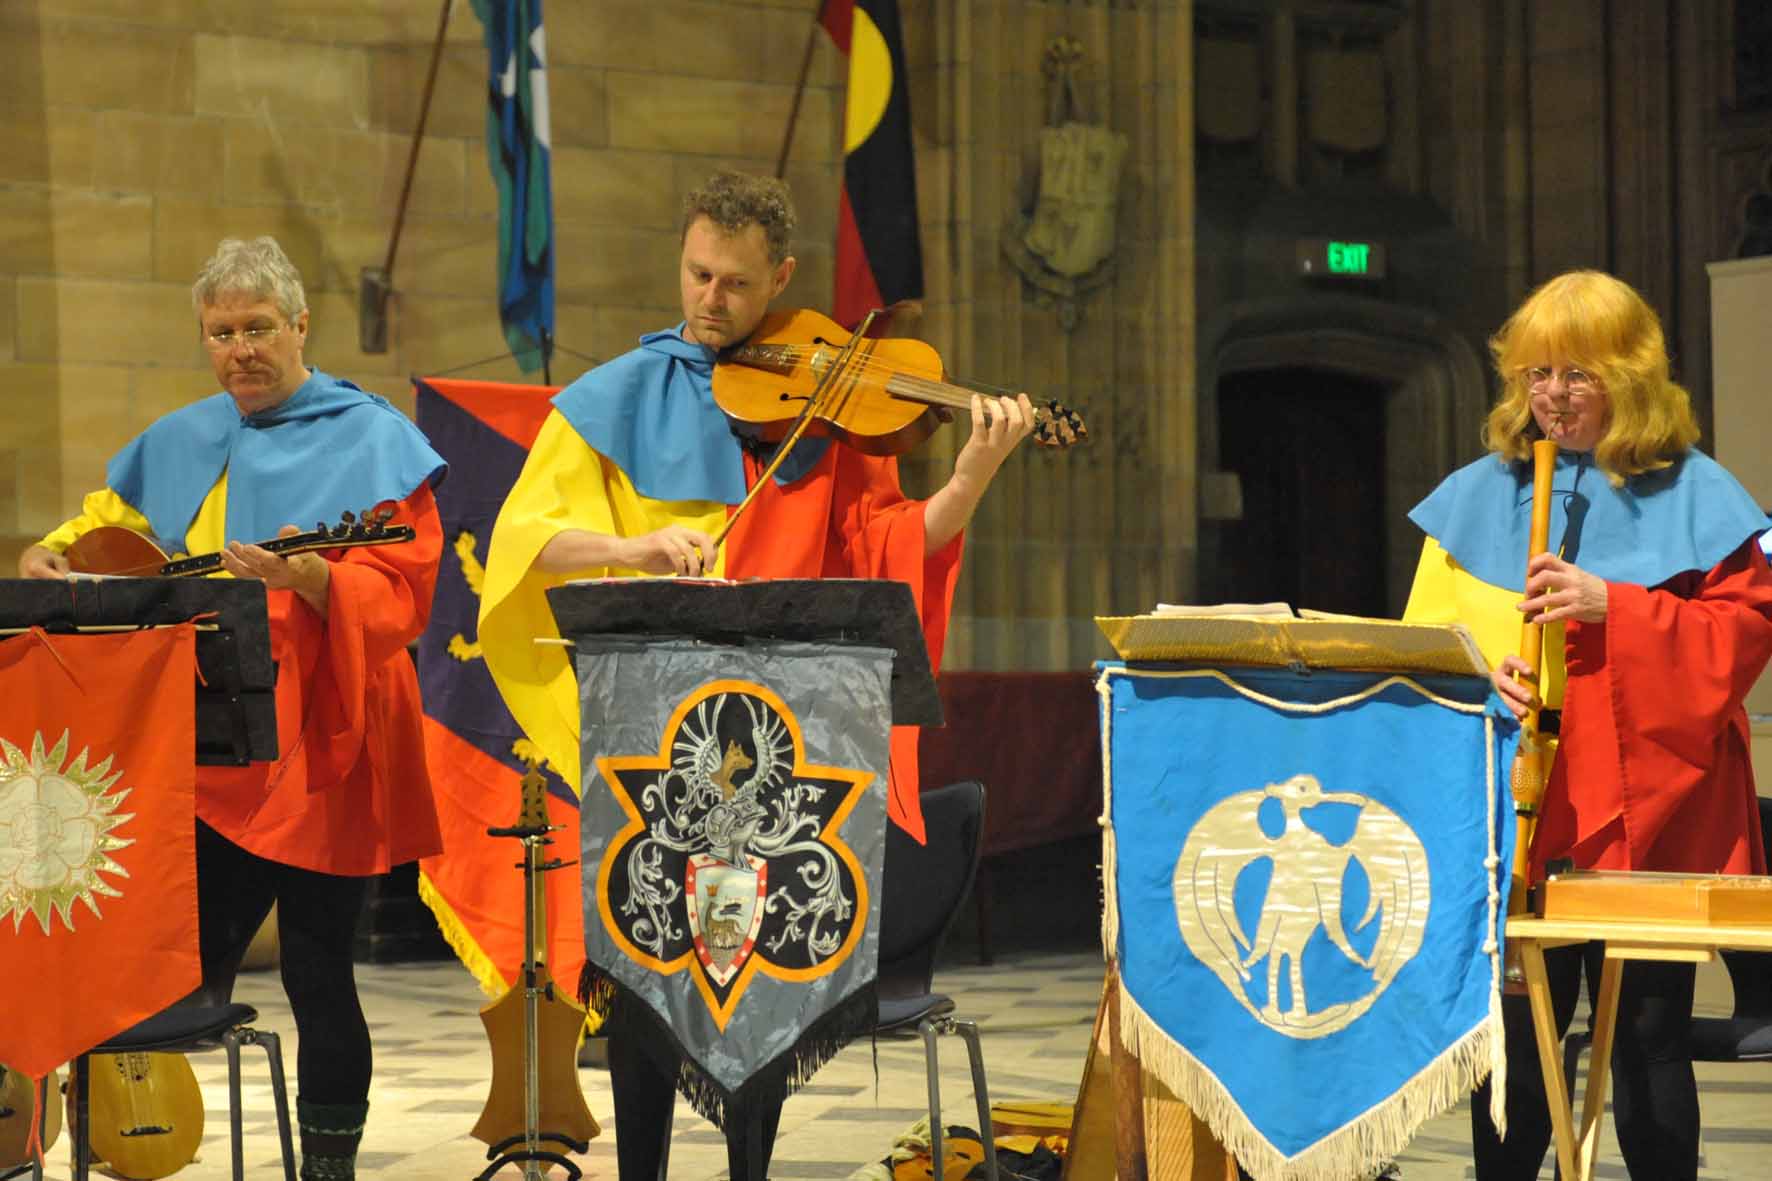 The Renaissance Players: ‘British Beasts, Birds and Bards’